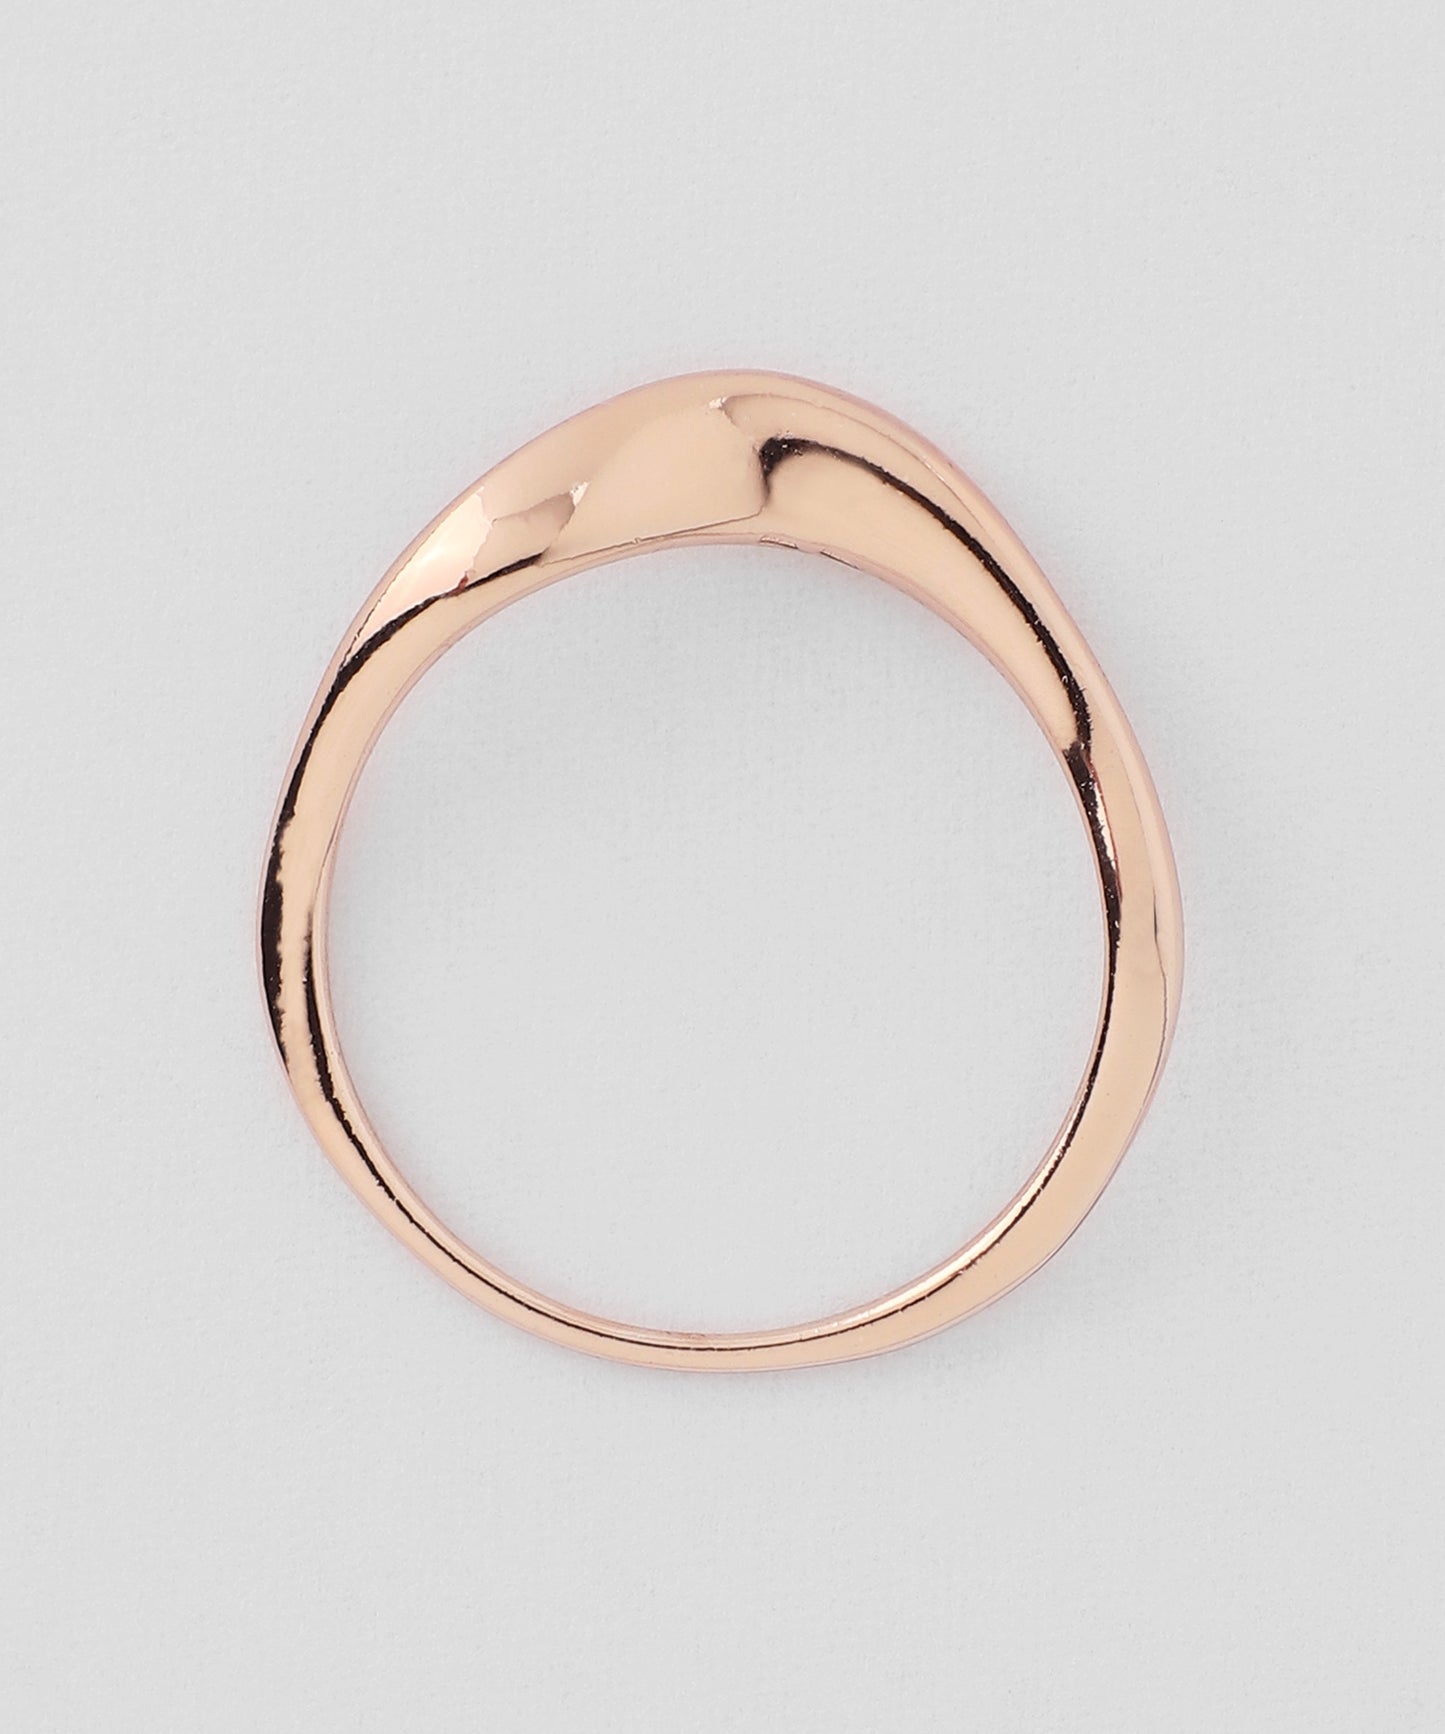 【Limited Quantity】【Online Store Limited】Nuance Ring [Sheer Pink Nudie]